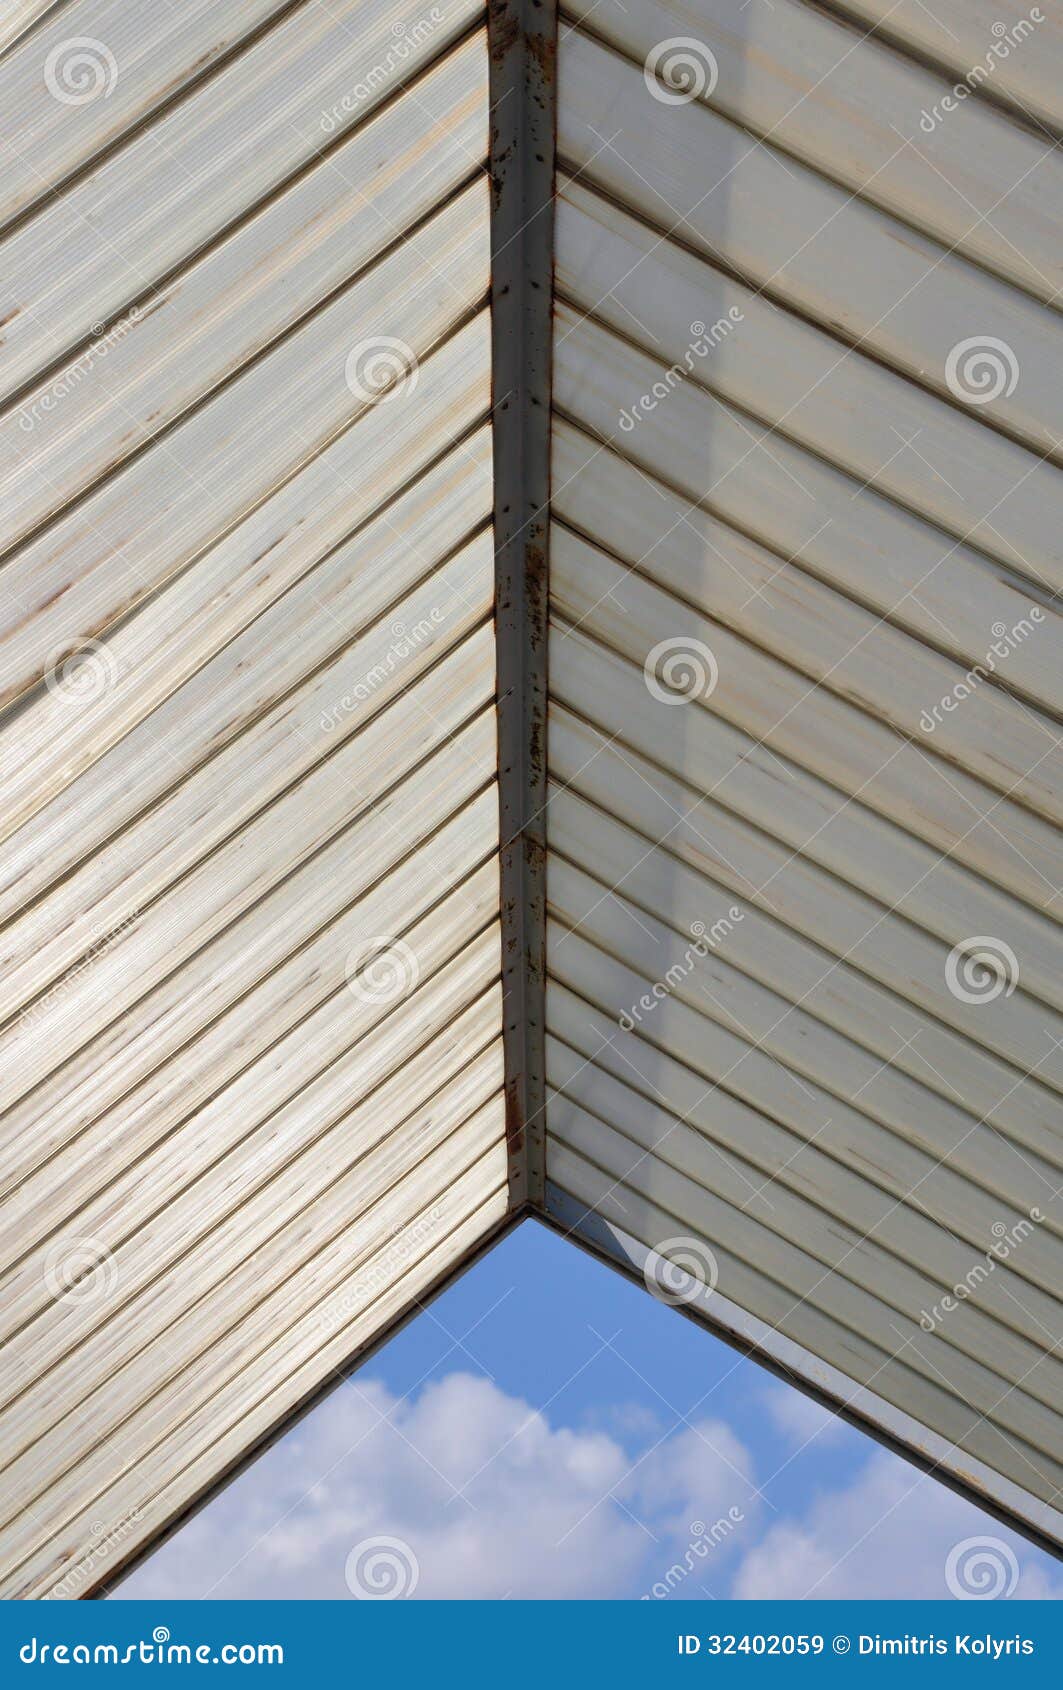 Plastic Roofing and Blue Sky Stock Image - Image of building, shadow ...